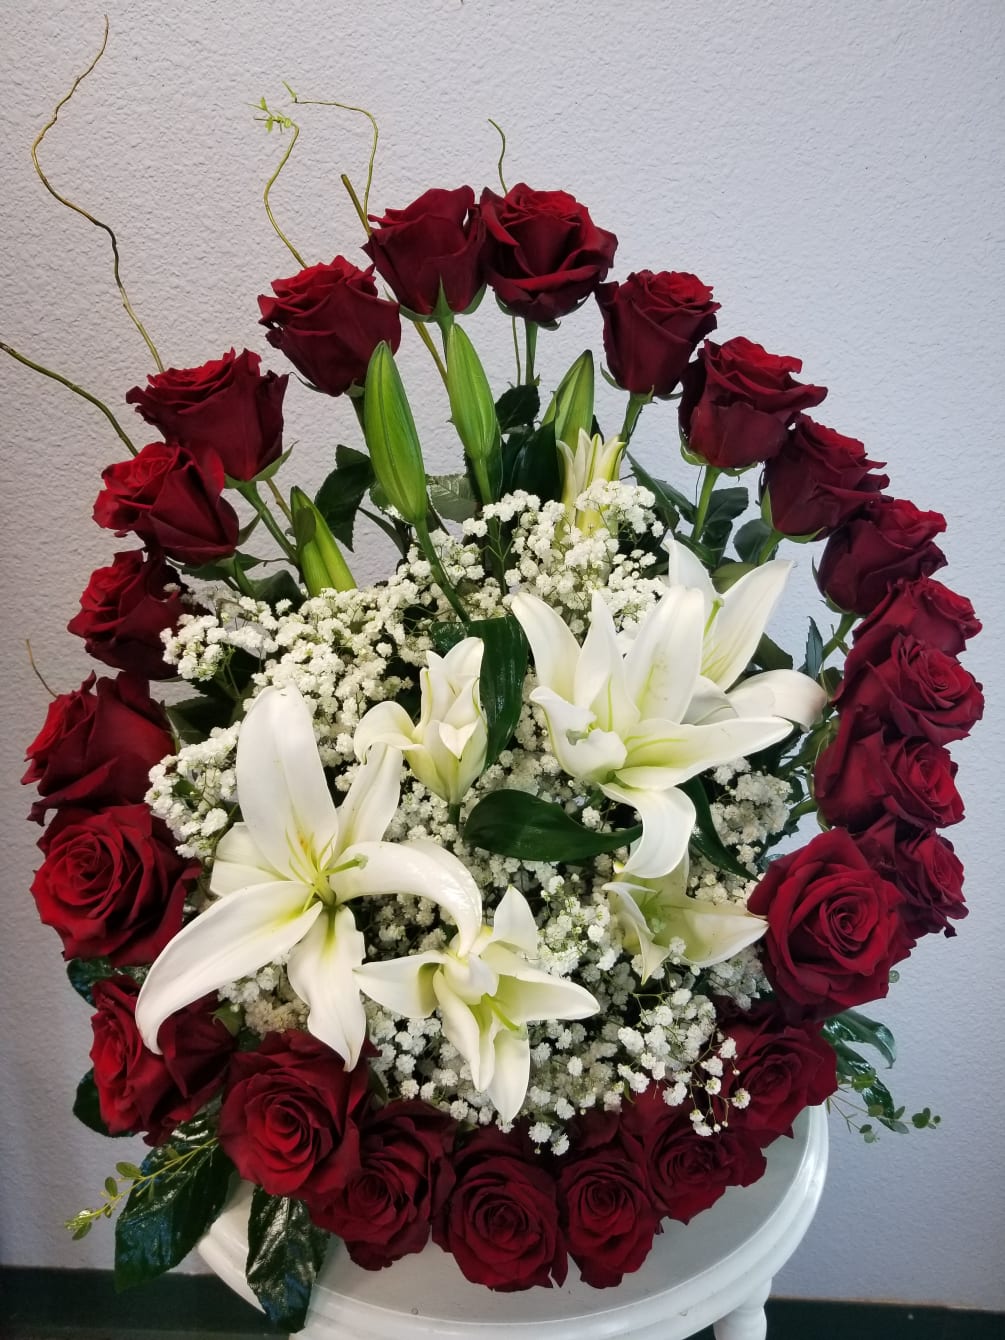 Two dozen red roses accented with White Lilies. 
**Local delivery or pick